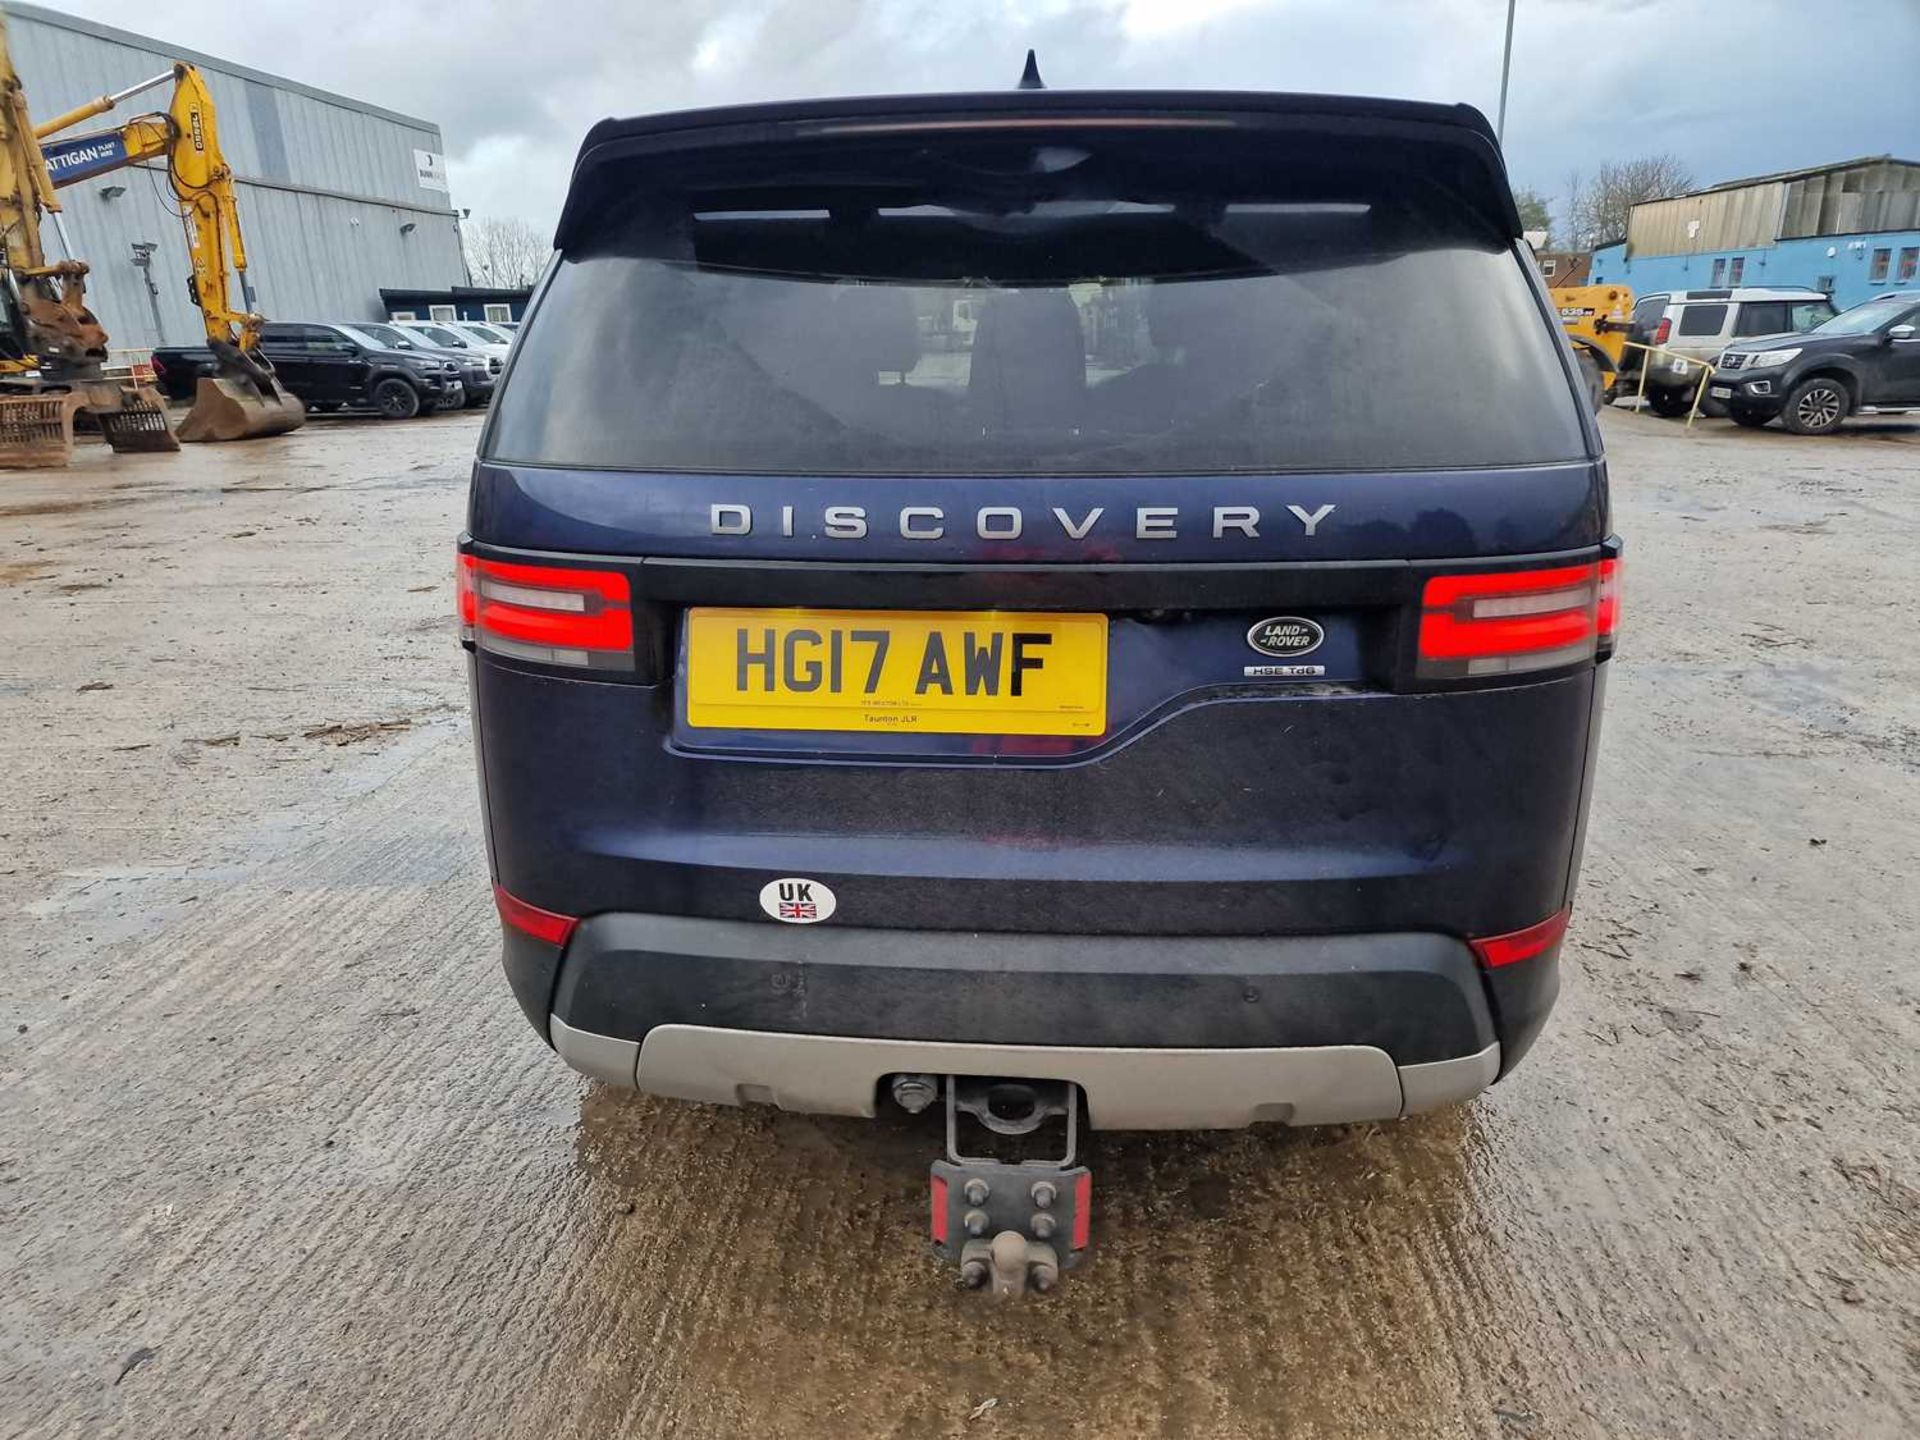 Landrover Discovery HSE Td6, Auto, Paddle Shift, Reverse Camera, Sat Nav, Parking Sensors, Full Leat - Image 29 of 75